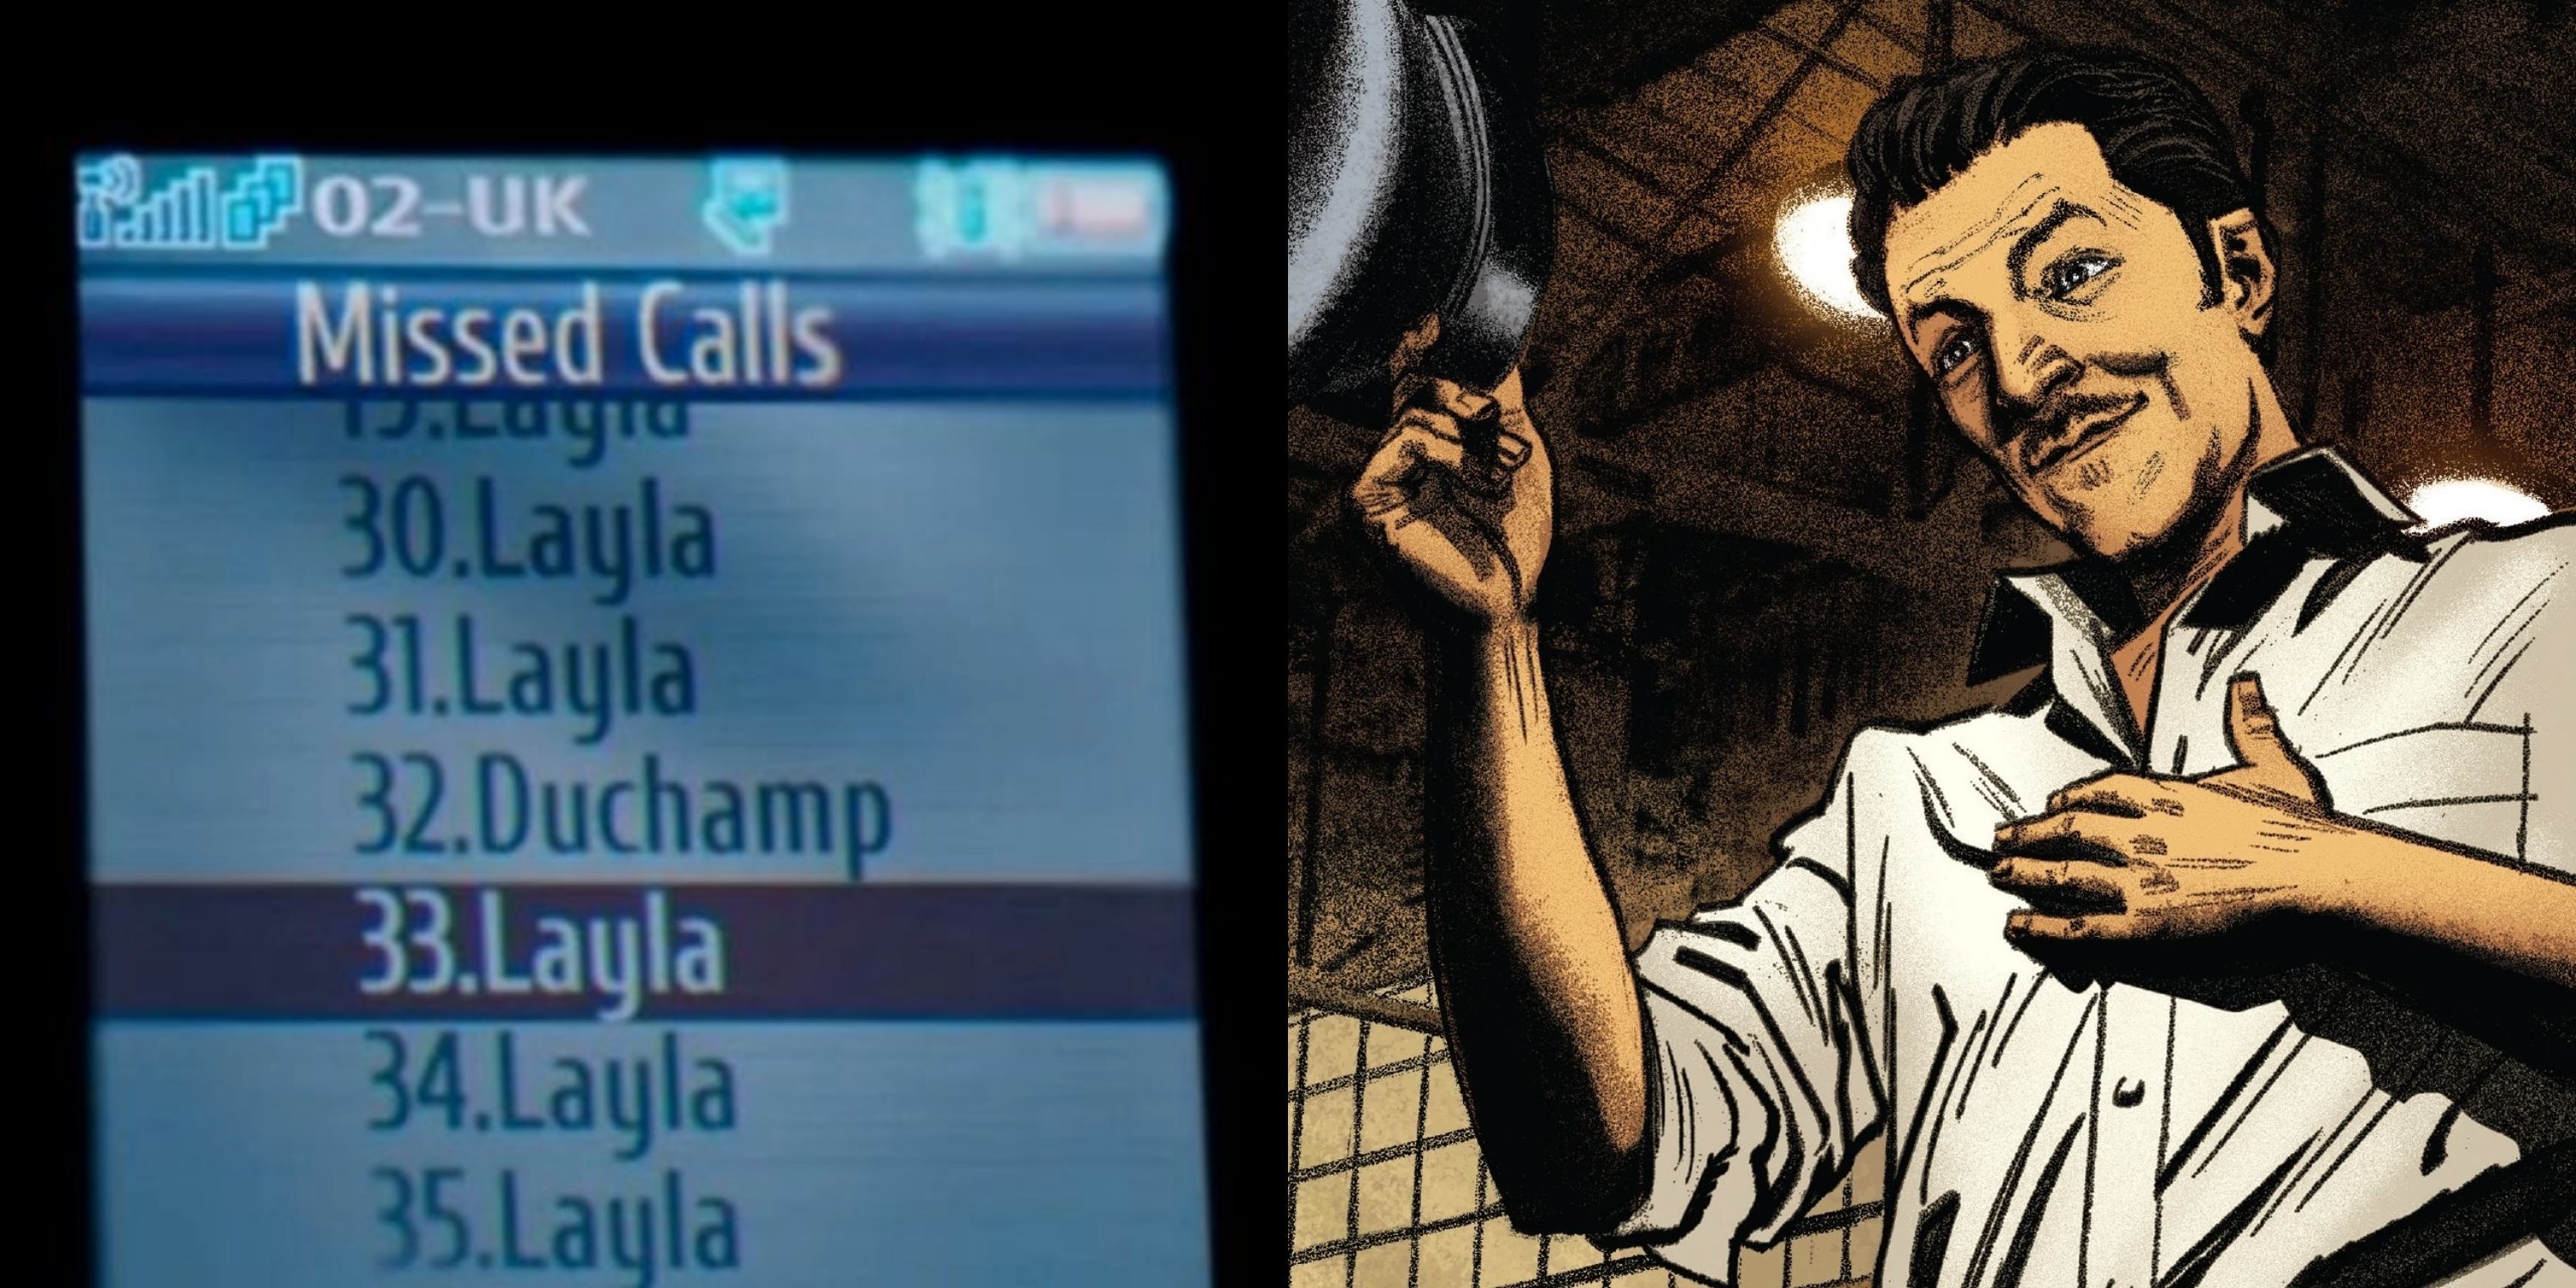 Easter Egg in Moon Knight teasing Jean-Paul &quot;Frenchie&quot; Duchamp